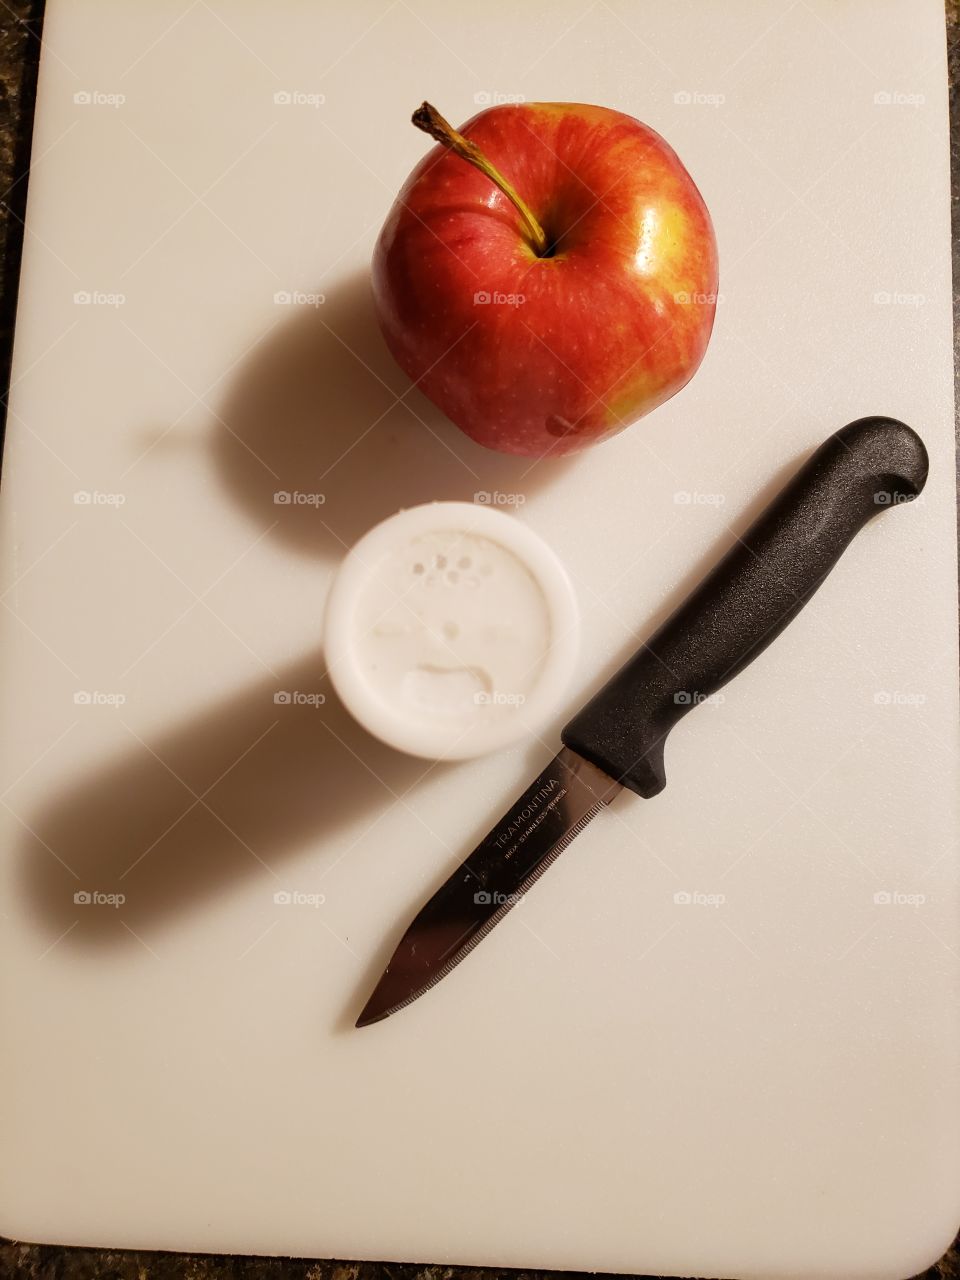 a apple a day